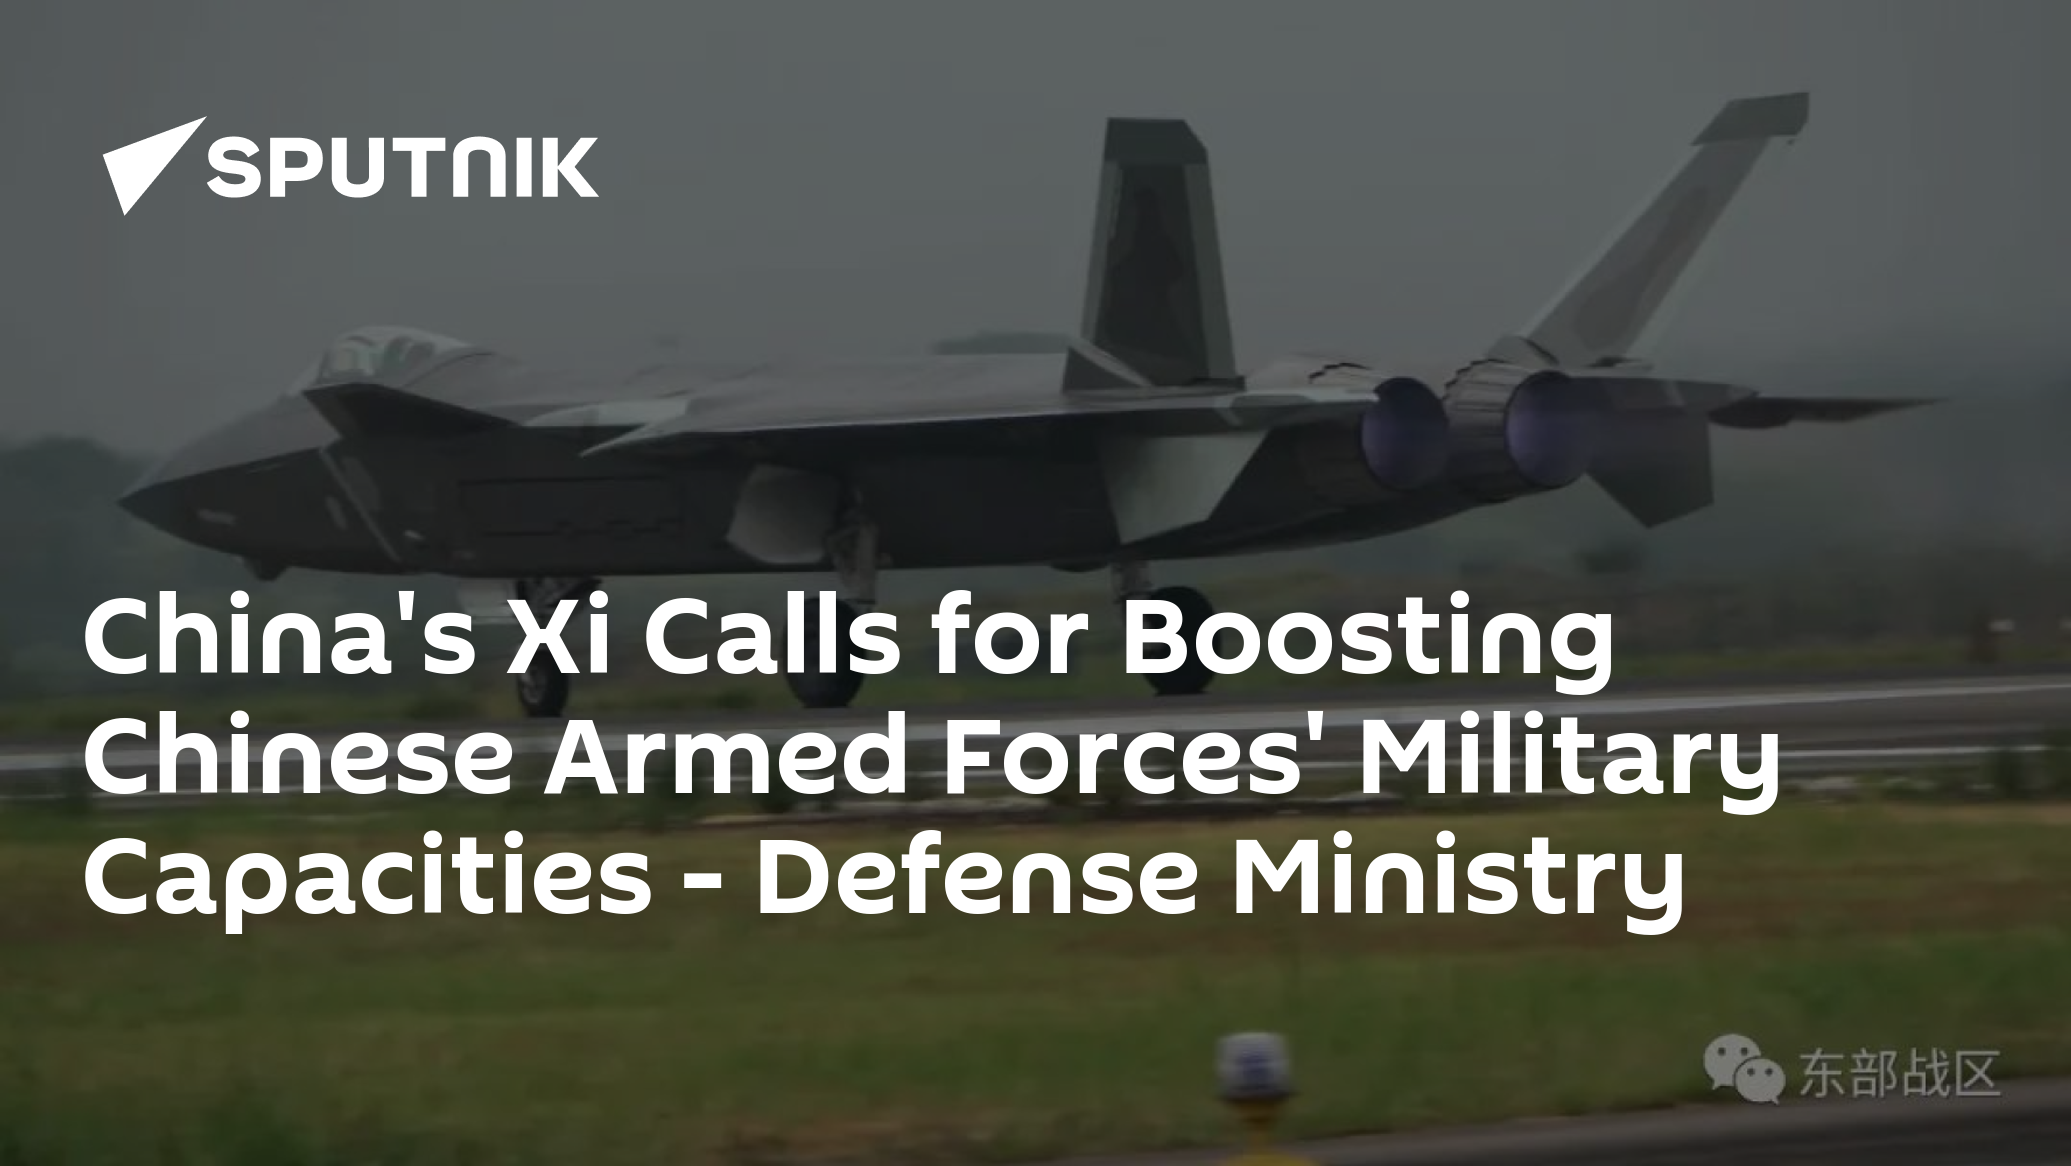 China's Xi Calls for Boosting Chinese Armed Forces' Military Capacities – Defense Ministry